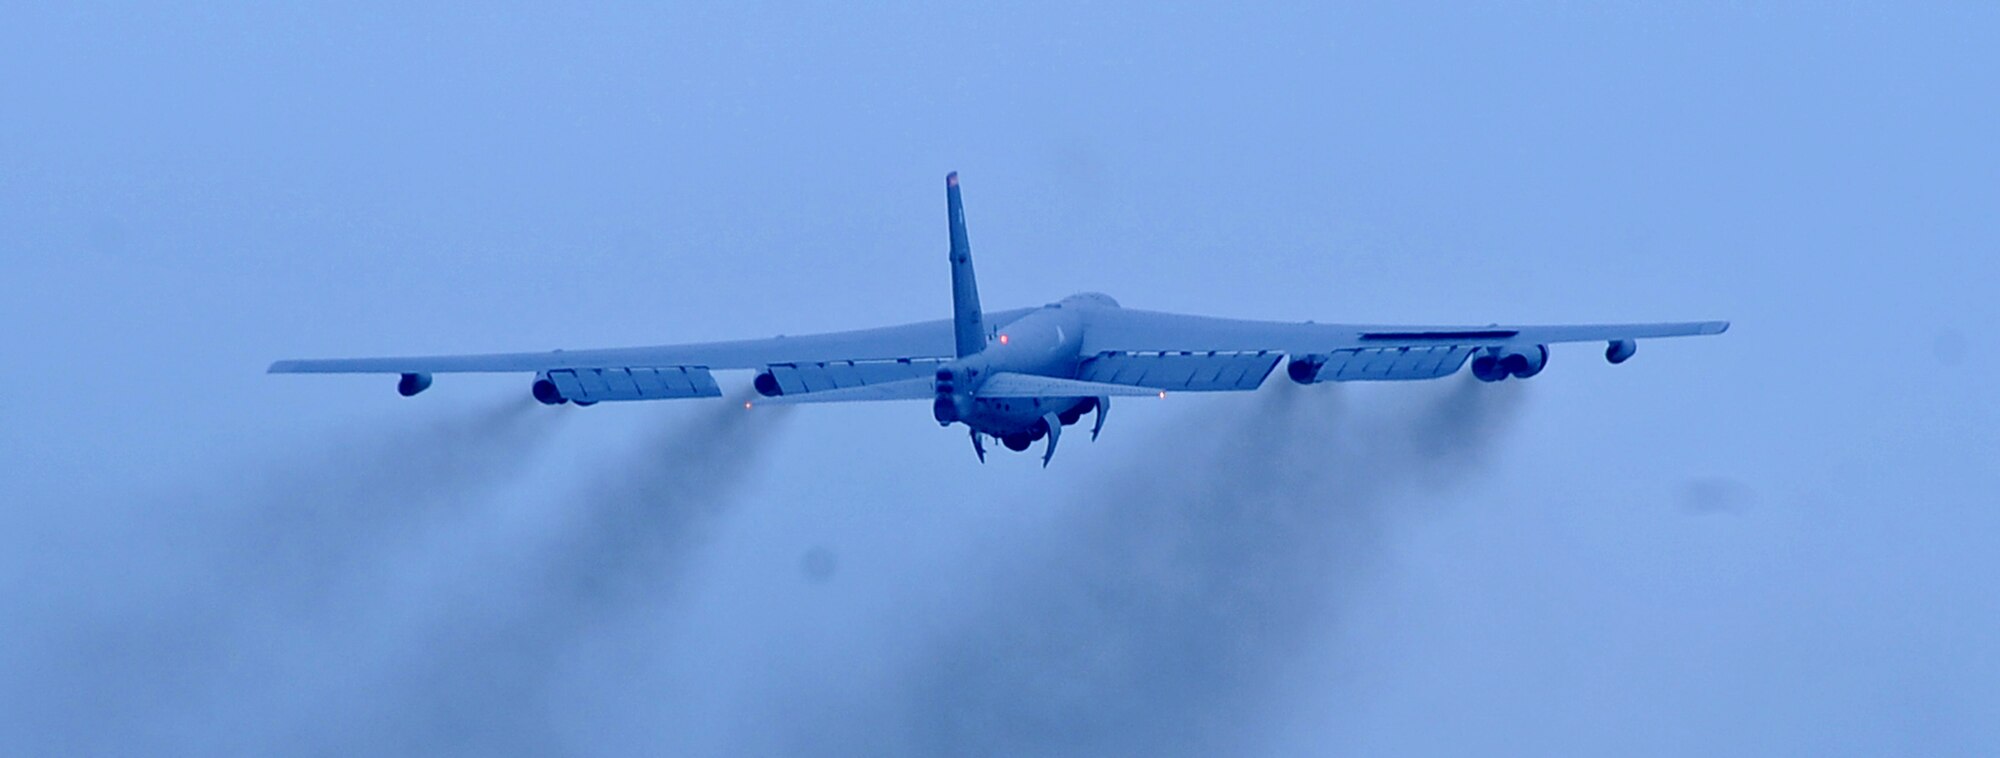 A B-52H Stratofortress raises its landing gear over Barksdale Air Force Base, La., April 2, 2014. Two B-52Hs, assigned to 96th Bomb Squadron, and two B-2 Spirit strategic bombers from Whiteman Air Force Base, Mo., flew non-stop from their respective home stations to conduct range training operations and low approach training flights within the vicinity of Hawaii, April 2, 2014. The training flights of approximately 20 and 21 hours in duration, ensure U.S. strategic bomber forces maintain a high state of readiness and demonstrate U.S. Strategic Command's ability to provide a bomber force that is flexible, credible, and always ready to respond to a variety of threats and situations around the world. (U.S. Air Force photo/Staff Sgt. Jason McCasland)